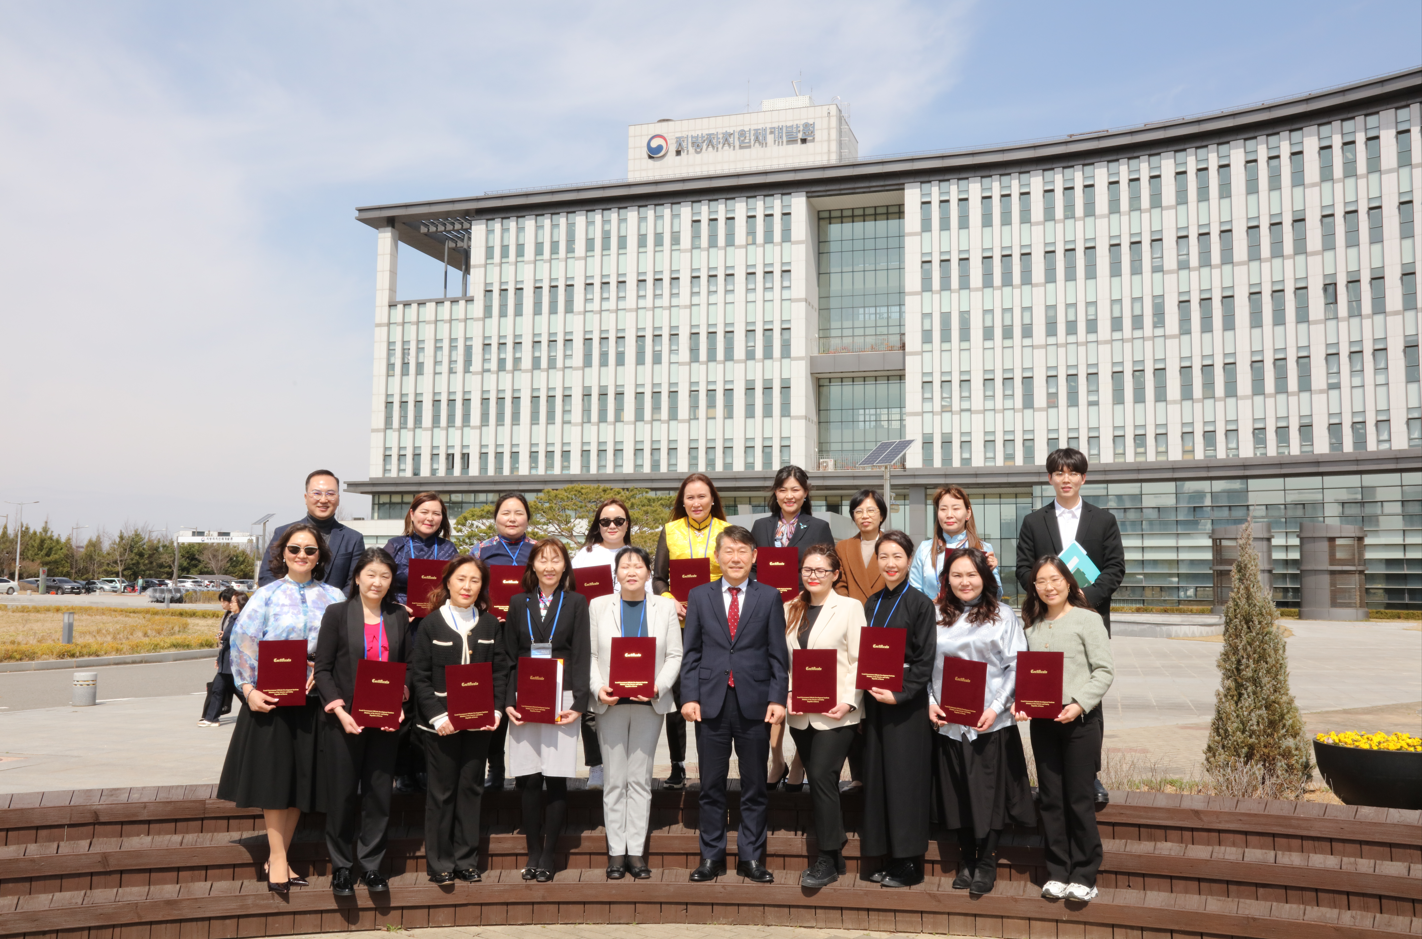 LOGODI Empowers the Mongolian Government Officials in Gender Equality 큰 이미지[마우스 클릭 시 창닫기]